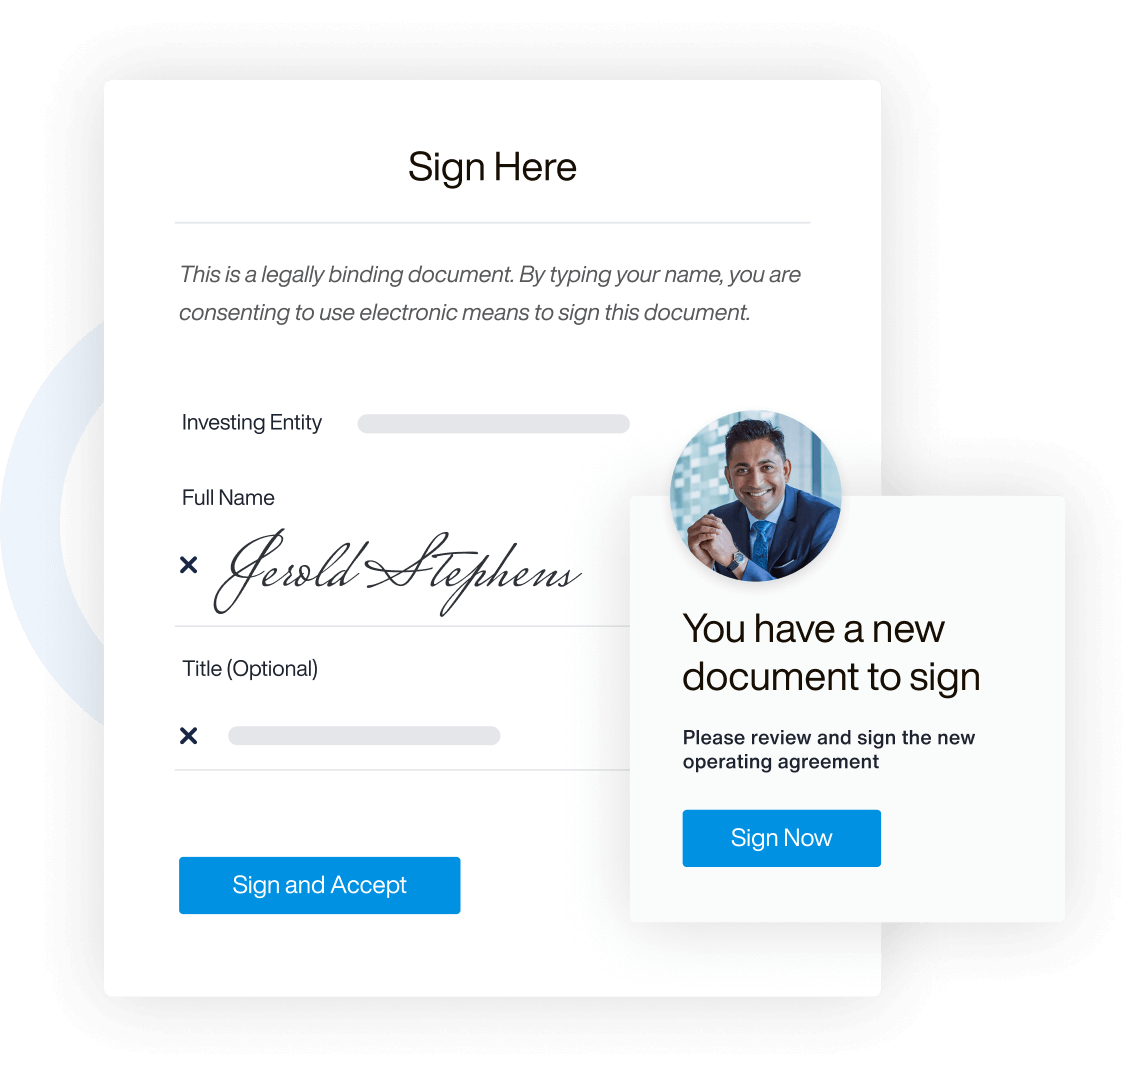 AppFolio Investment Management interface windows of Sign Here and You have a new document to sign, with a circle shaped photo of a man in a suit and a light blue half circle shape in the background.